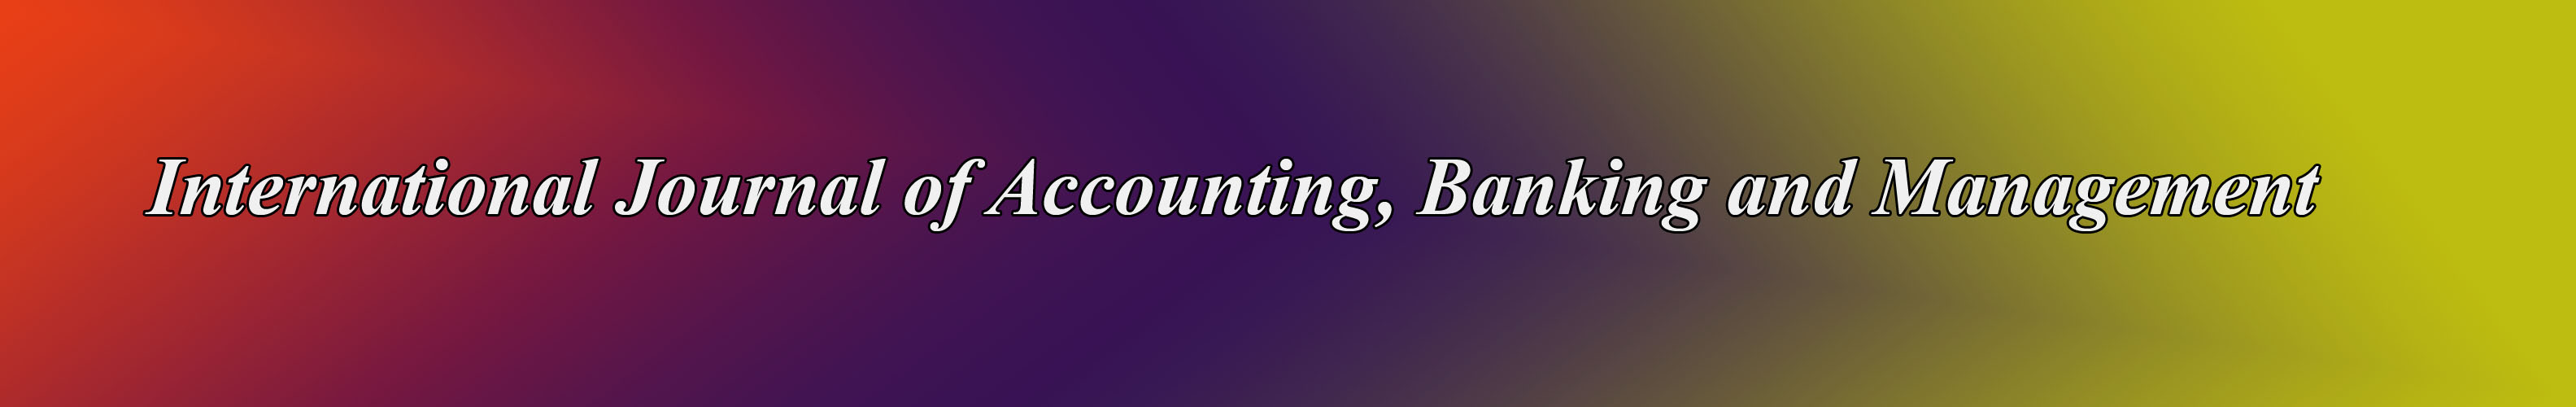 International Journal of Accounting Banking and Management